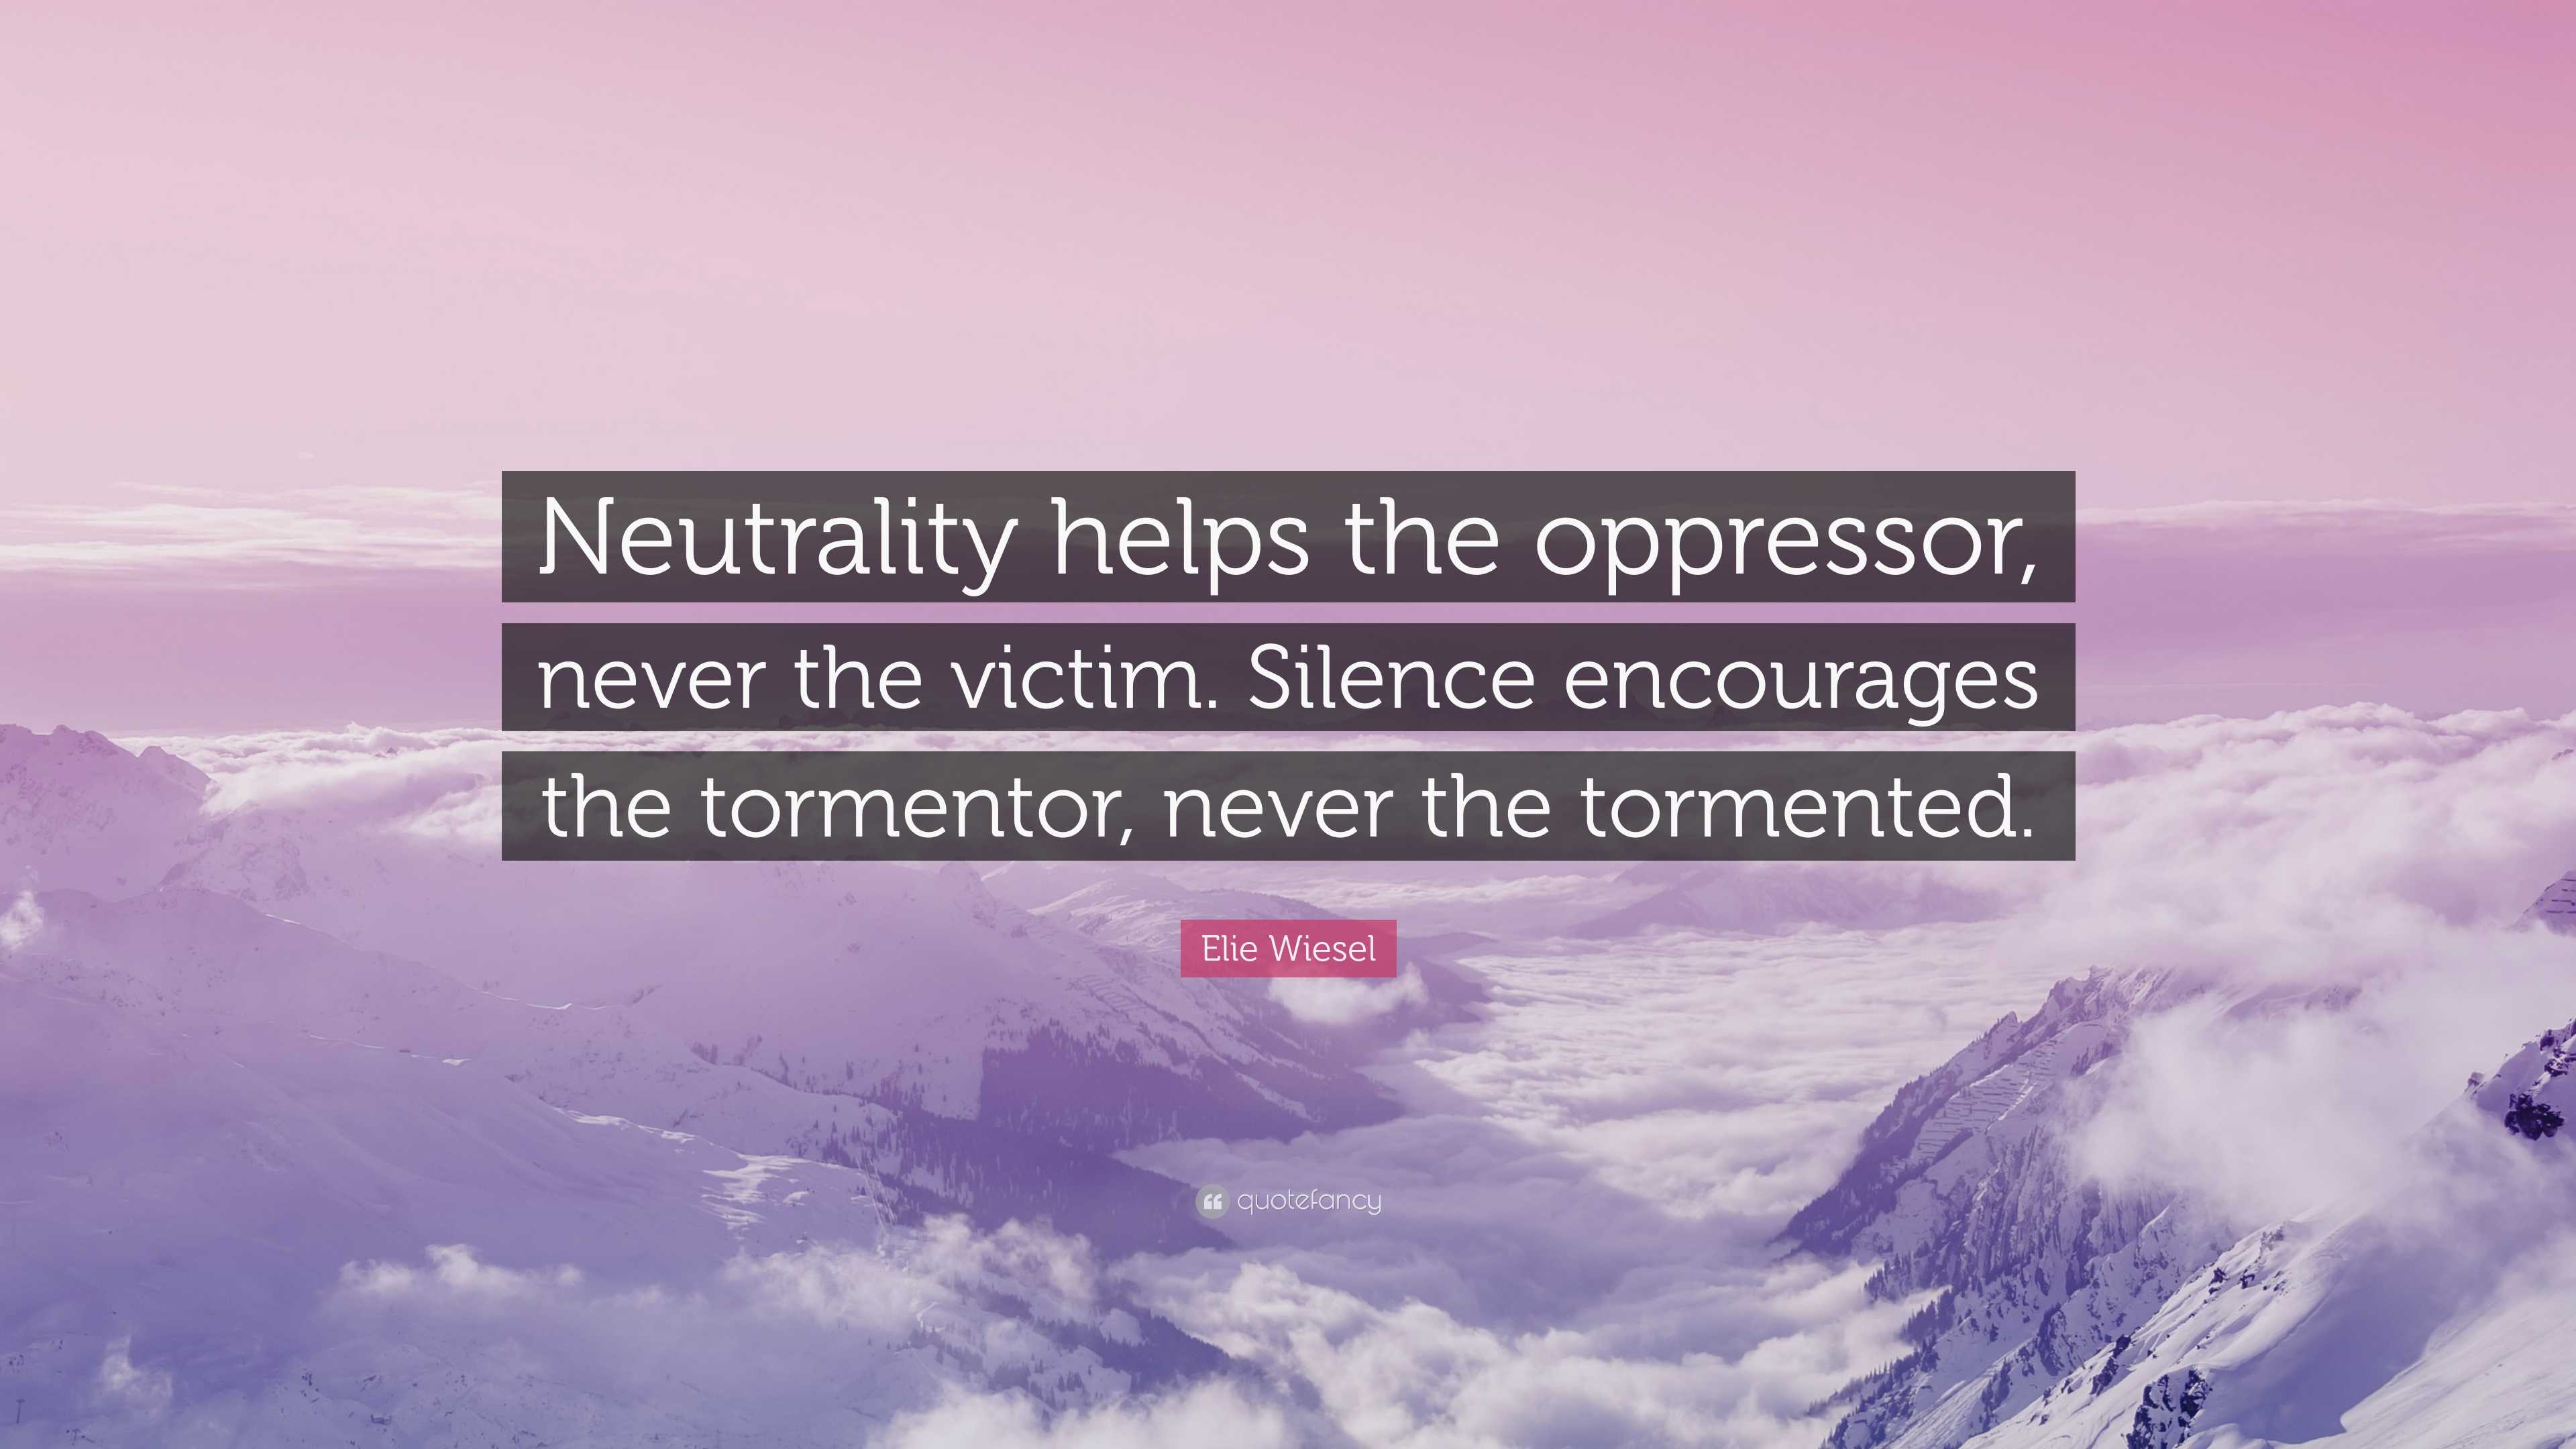 Elie Wiesel Quote: “Neutrality helps the oppressor, never the victim ...